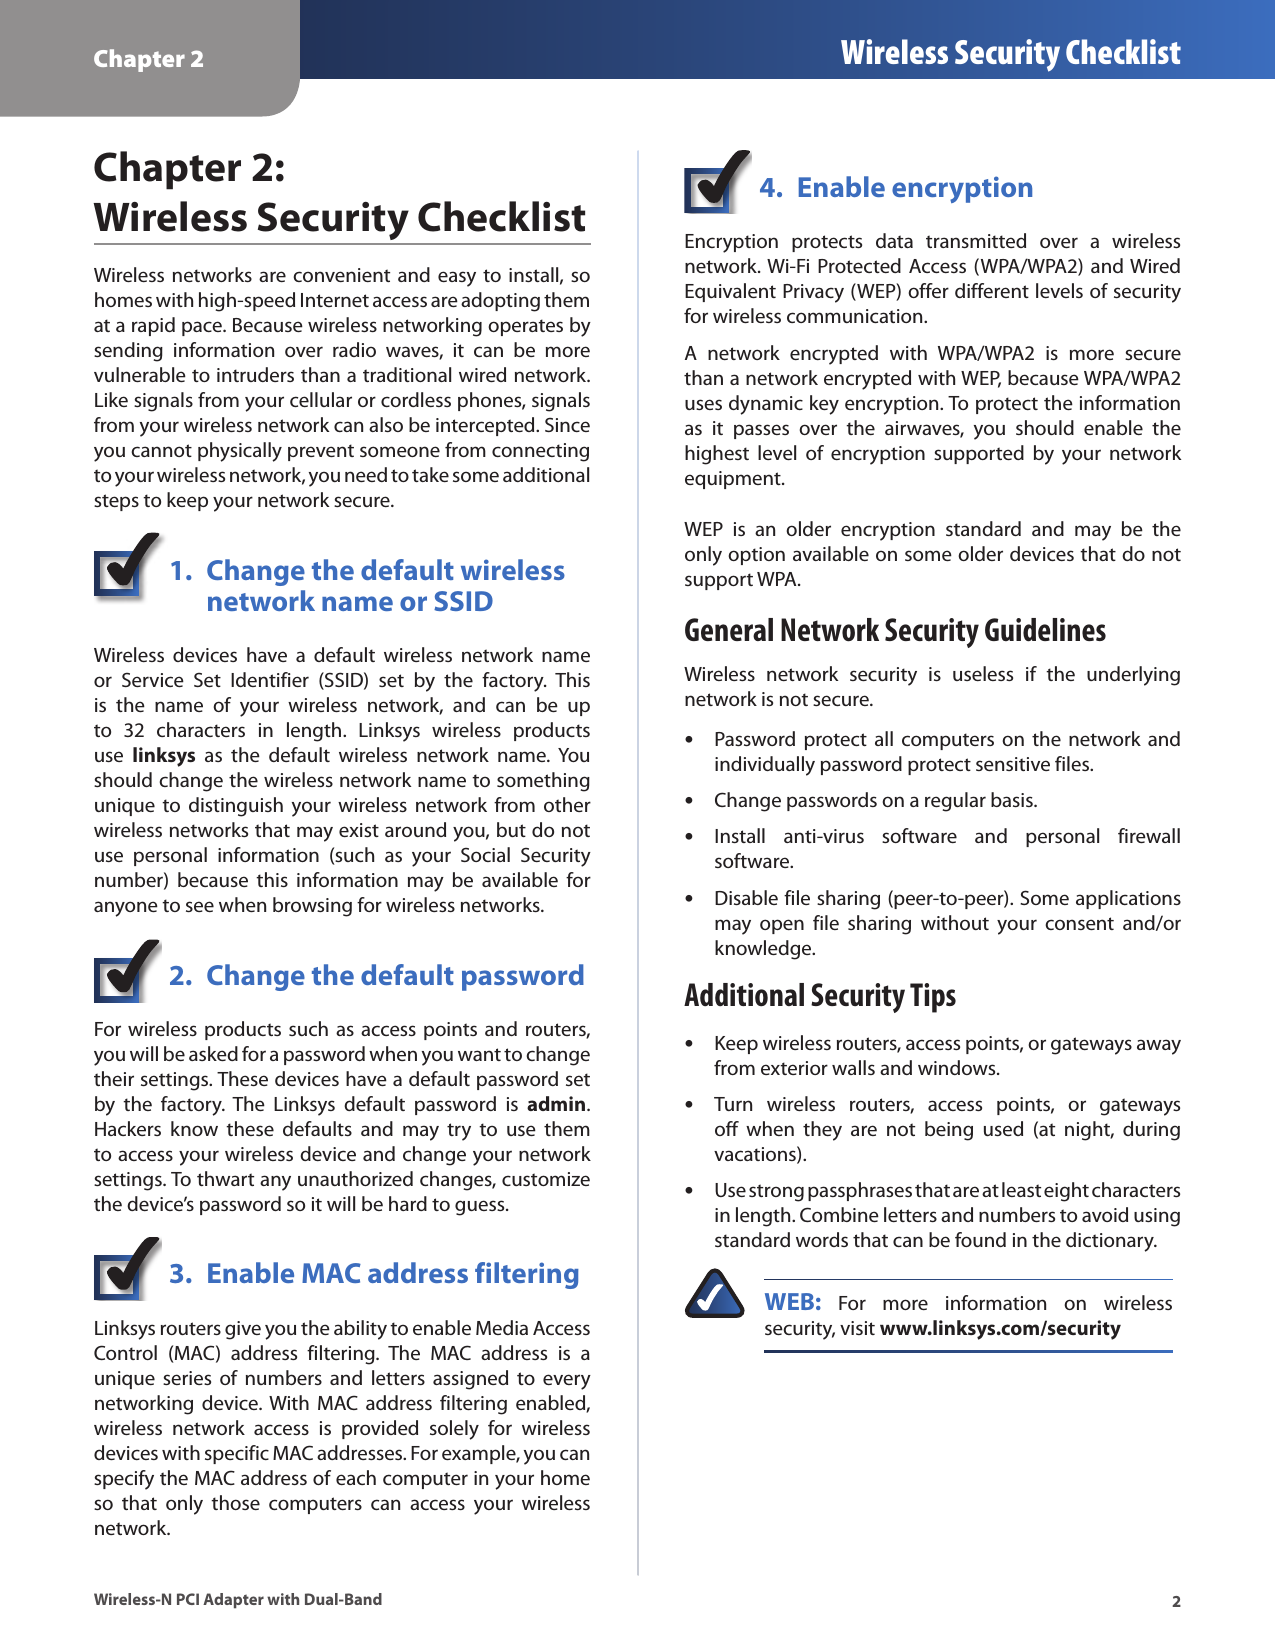 Chapter 2 Wireless Security Checklist2Wireless-N PCI Adapter with Dual-BandChapter 2:  Wireless Security ChecklistWireless  networks are convenient  and  easy to install, so homes with high-speed Internet access are adopting them at a rapid pace. Because wireless networking operates by sending  information  over  radio  waves,  it  can  be  more vulnerable to intruders than a traditional wired network. Like signals from your cellular or cordless phones, signals from your wireless network can also be intercepted. Since you cannot physically prevent someone from connecting to your wireless network, you need to take some additional steps to keep your network secure. 1.  Change the default wireless    network name or SSIDWireless  devices  have  a  default  wireless  network  name or  Service  Set  Identifier  (SSID)  set  by  the  factory.  This is  the  name  of  your  wireless  network,  and  can  be  up to  32  characters  in  length.  Linksys  wireless  products use  linksys  as  the  default  wireless  network  name.  You should change the wireless network name to something unique  to distinguish  your wireless  network from  other wireless networks that may exist around you, but do not use  personal  information  (such  as  your  Social  Security number)  because  this  information  may  be  available  for anyone to see when browsing for wireless networks. 2.  Change the default passwordFor wireless products such as access points and routers, you will be asked for a password when you want to change their settings. These devices have a default password set by  the  factory.  The  Linksys  default  password  is  admin. Hackers  know  these  defaults  and  may  try  to  use  them to access your wireless device and change your network settings. To thwart any unauthorized changes, customize the device’s password so it will be hard to guess.3.  Enable MAC address filteringLinksys routers give you the ability to enable Media Access Control  (MAC)  address  filtering.  The  MAC  address  is  a unique  series  of  numbers  and  letters  assigned  to  every networking  device. With  MAC  address filtering  enabled, wireless  network  access  is  provided  solely  for  wireless devices with specific MAC addresses. For example, you can specify the MAC address of each computer in your home so  that  only  those  computers  can  access  your  wireless network. 4.  Enable encryptionEncryption  protects  data  transmitted  over  a  wireless network. Wi-Fi Protected  Access (WPA/WPA2)  and Wired Equivalent Privacy (WEP) offer different levels of security for wireless communication.A  network  encrypted  with  WPA/WPA2  is  more  secure than a network encrypted with WEP, because WPA/WPA2 uses dynamic key encryption. To protect the information as  it  passes  over  the  airwaves,  you  should  enable  the highest  level  of  encryption  supported  by  your  network equipment. WEP  is  an  older  encryption  standard  and  may  be  the only option available on some older devices that do not support WPA.General Network Security GuidelinesWireless  network  security  is  useless  if  the  underlying network is not secure. Password protect  all computers on  the network  and  •individually password protect sensitive files.Change passwords on a regular basis. •Install  anti-virus  software  and  personal  firewall  •software.Disable file sharing (peer-to-peer). Some applications  •may  open  file  sharing  without  your  consent  and/or knowledge.Additional Security TipsKeep wireless routers, access points, or gateways away  •from exterior walls and windows.Turn  wireless  routers,  access  points,  or  gateways  •off  when  they  are  not  being  used  (at  night,  during vacations).Use strong passphrases that are at least eight characters  •in length. Combine letters and numbers to avoid using standard words that can be found in the dictionary. WEB:  For  more  information  on  wireless security, visit www.linksys.com/security